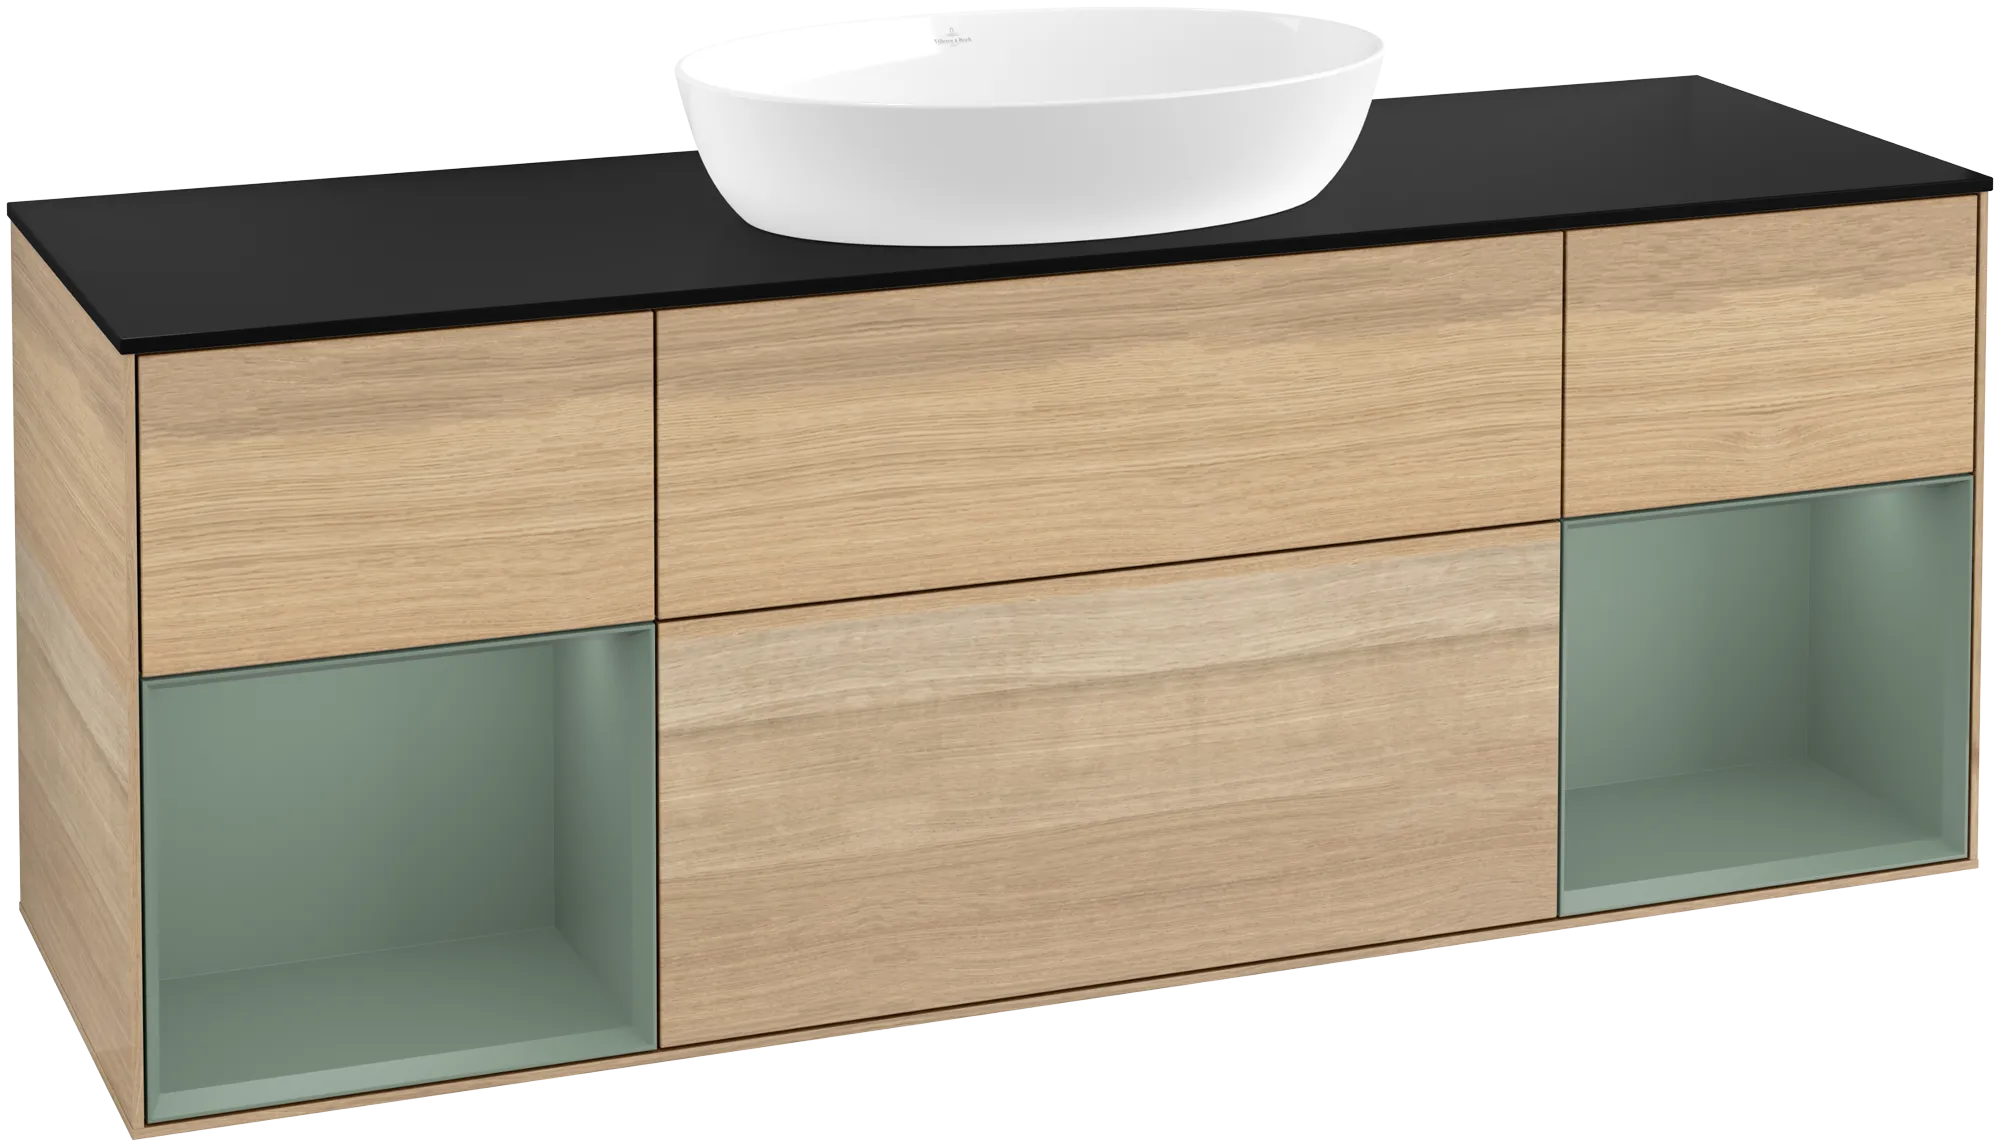 Picture of VILLEROY BOCH Finion Vanity unit, with lighting, 4 pull-out compartments, 1600 x 603 x 501 mm, Oak Veneer / Olive Matt Lacquer / Glass Black Matt #GD02GMPC